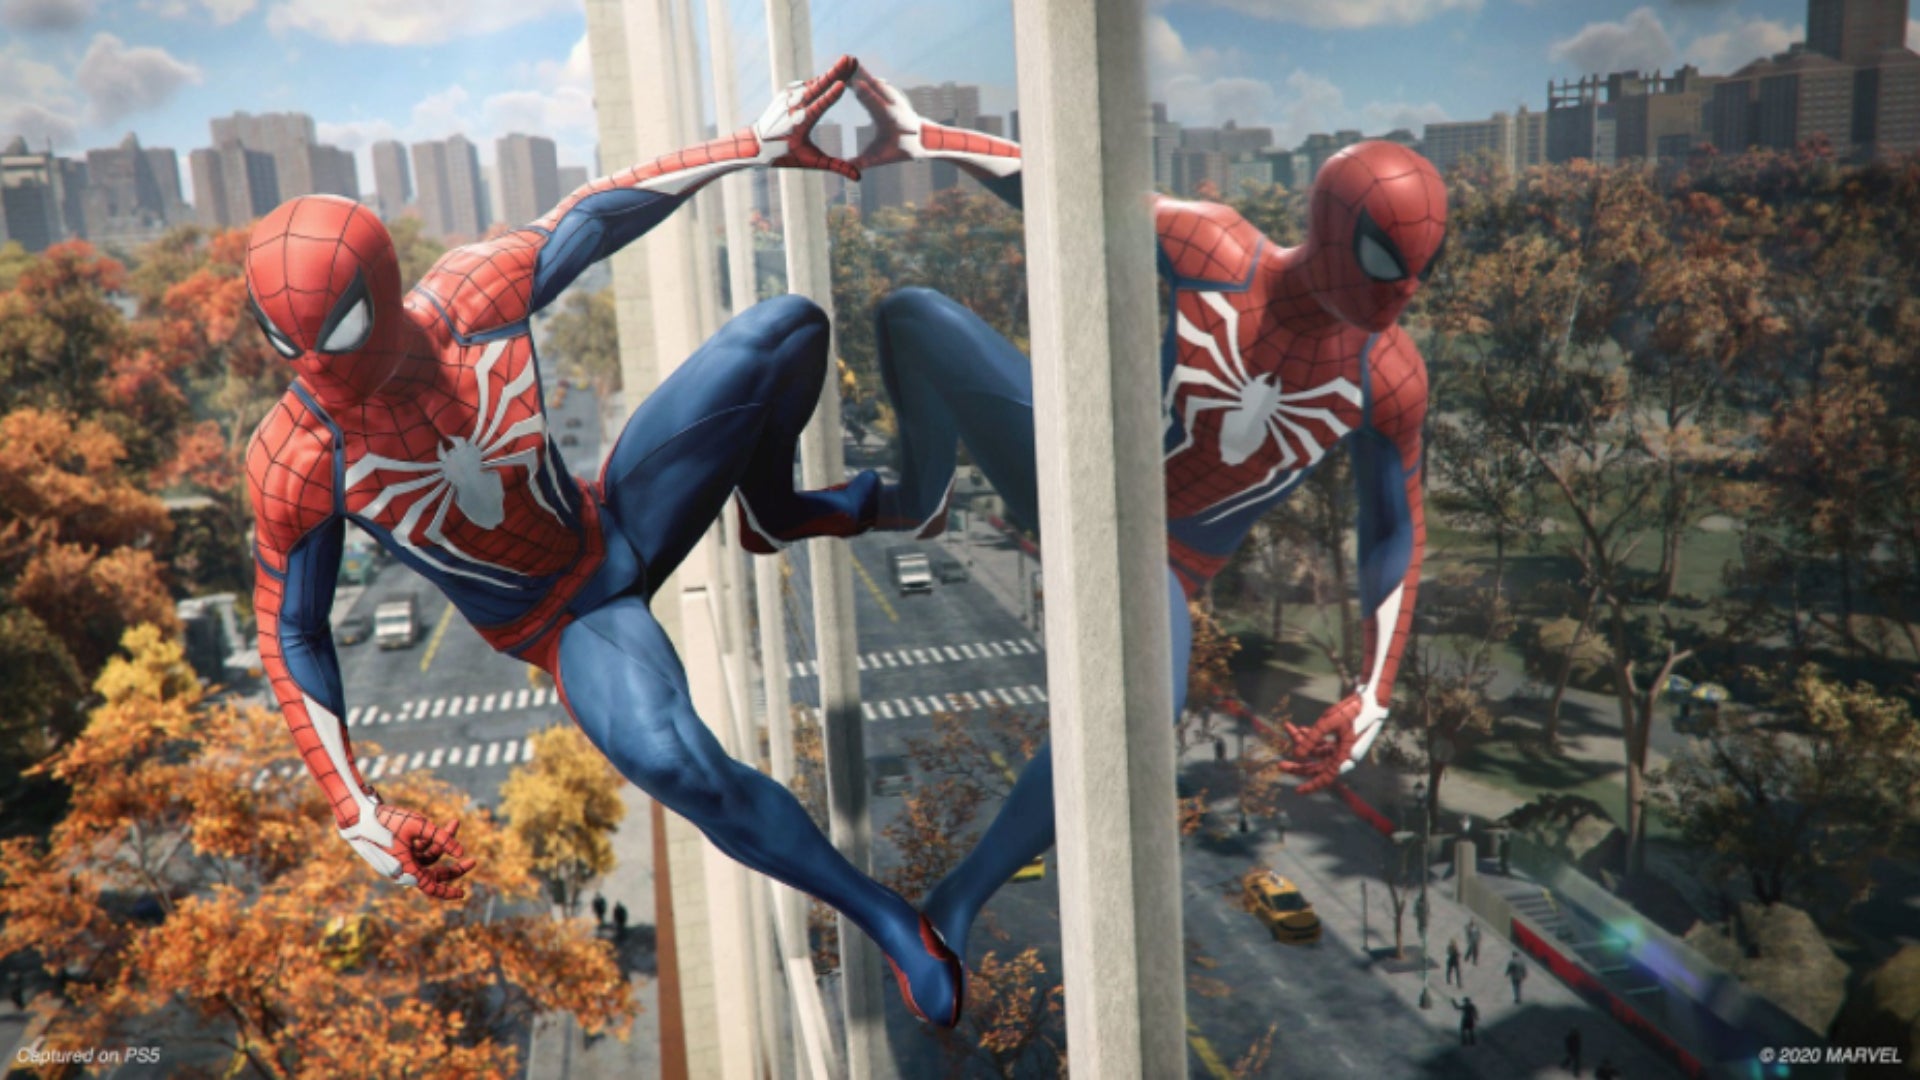 Image for Spider-Man PC files reveal that co-op and PvP were once being developed